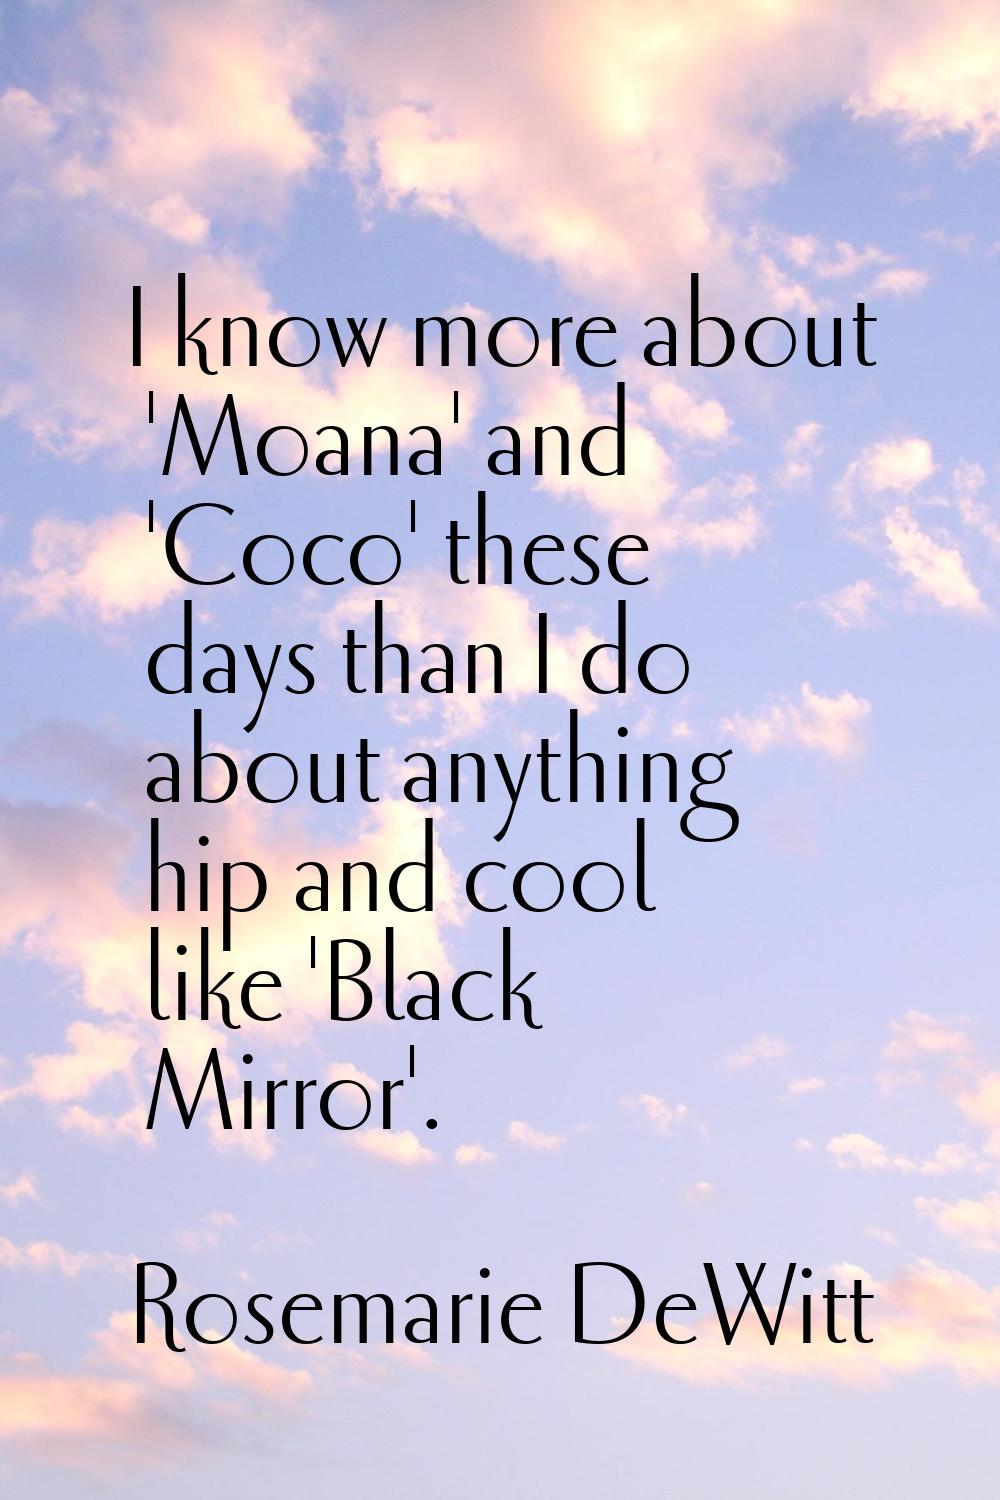 I know more about 'Moana' and 'Coco' these days than I do about anything hip and cool like 'Black M